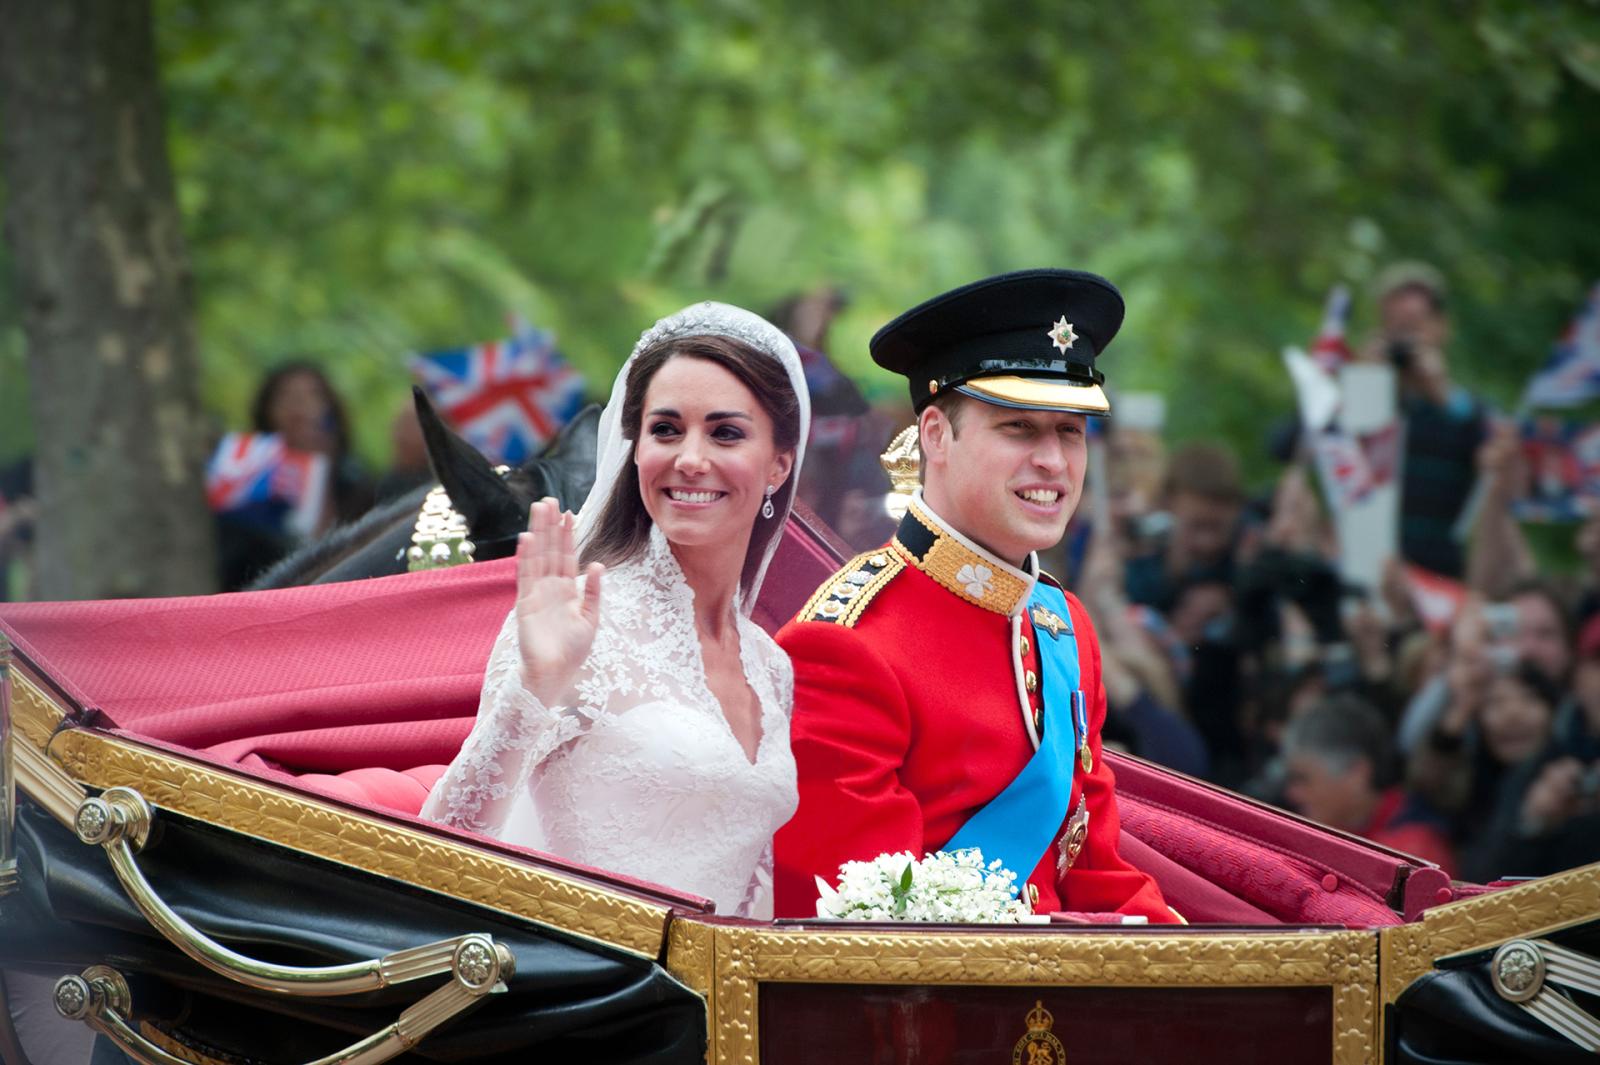 These 6 Royal Weddings Will Leave You Speechless (and Maybe a Little Envious) - image 4